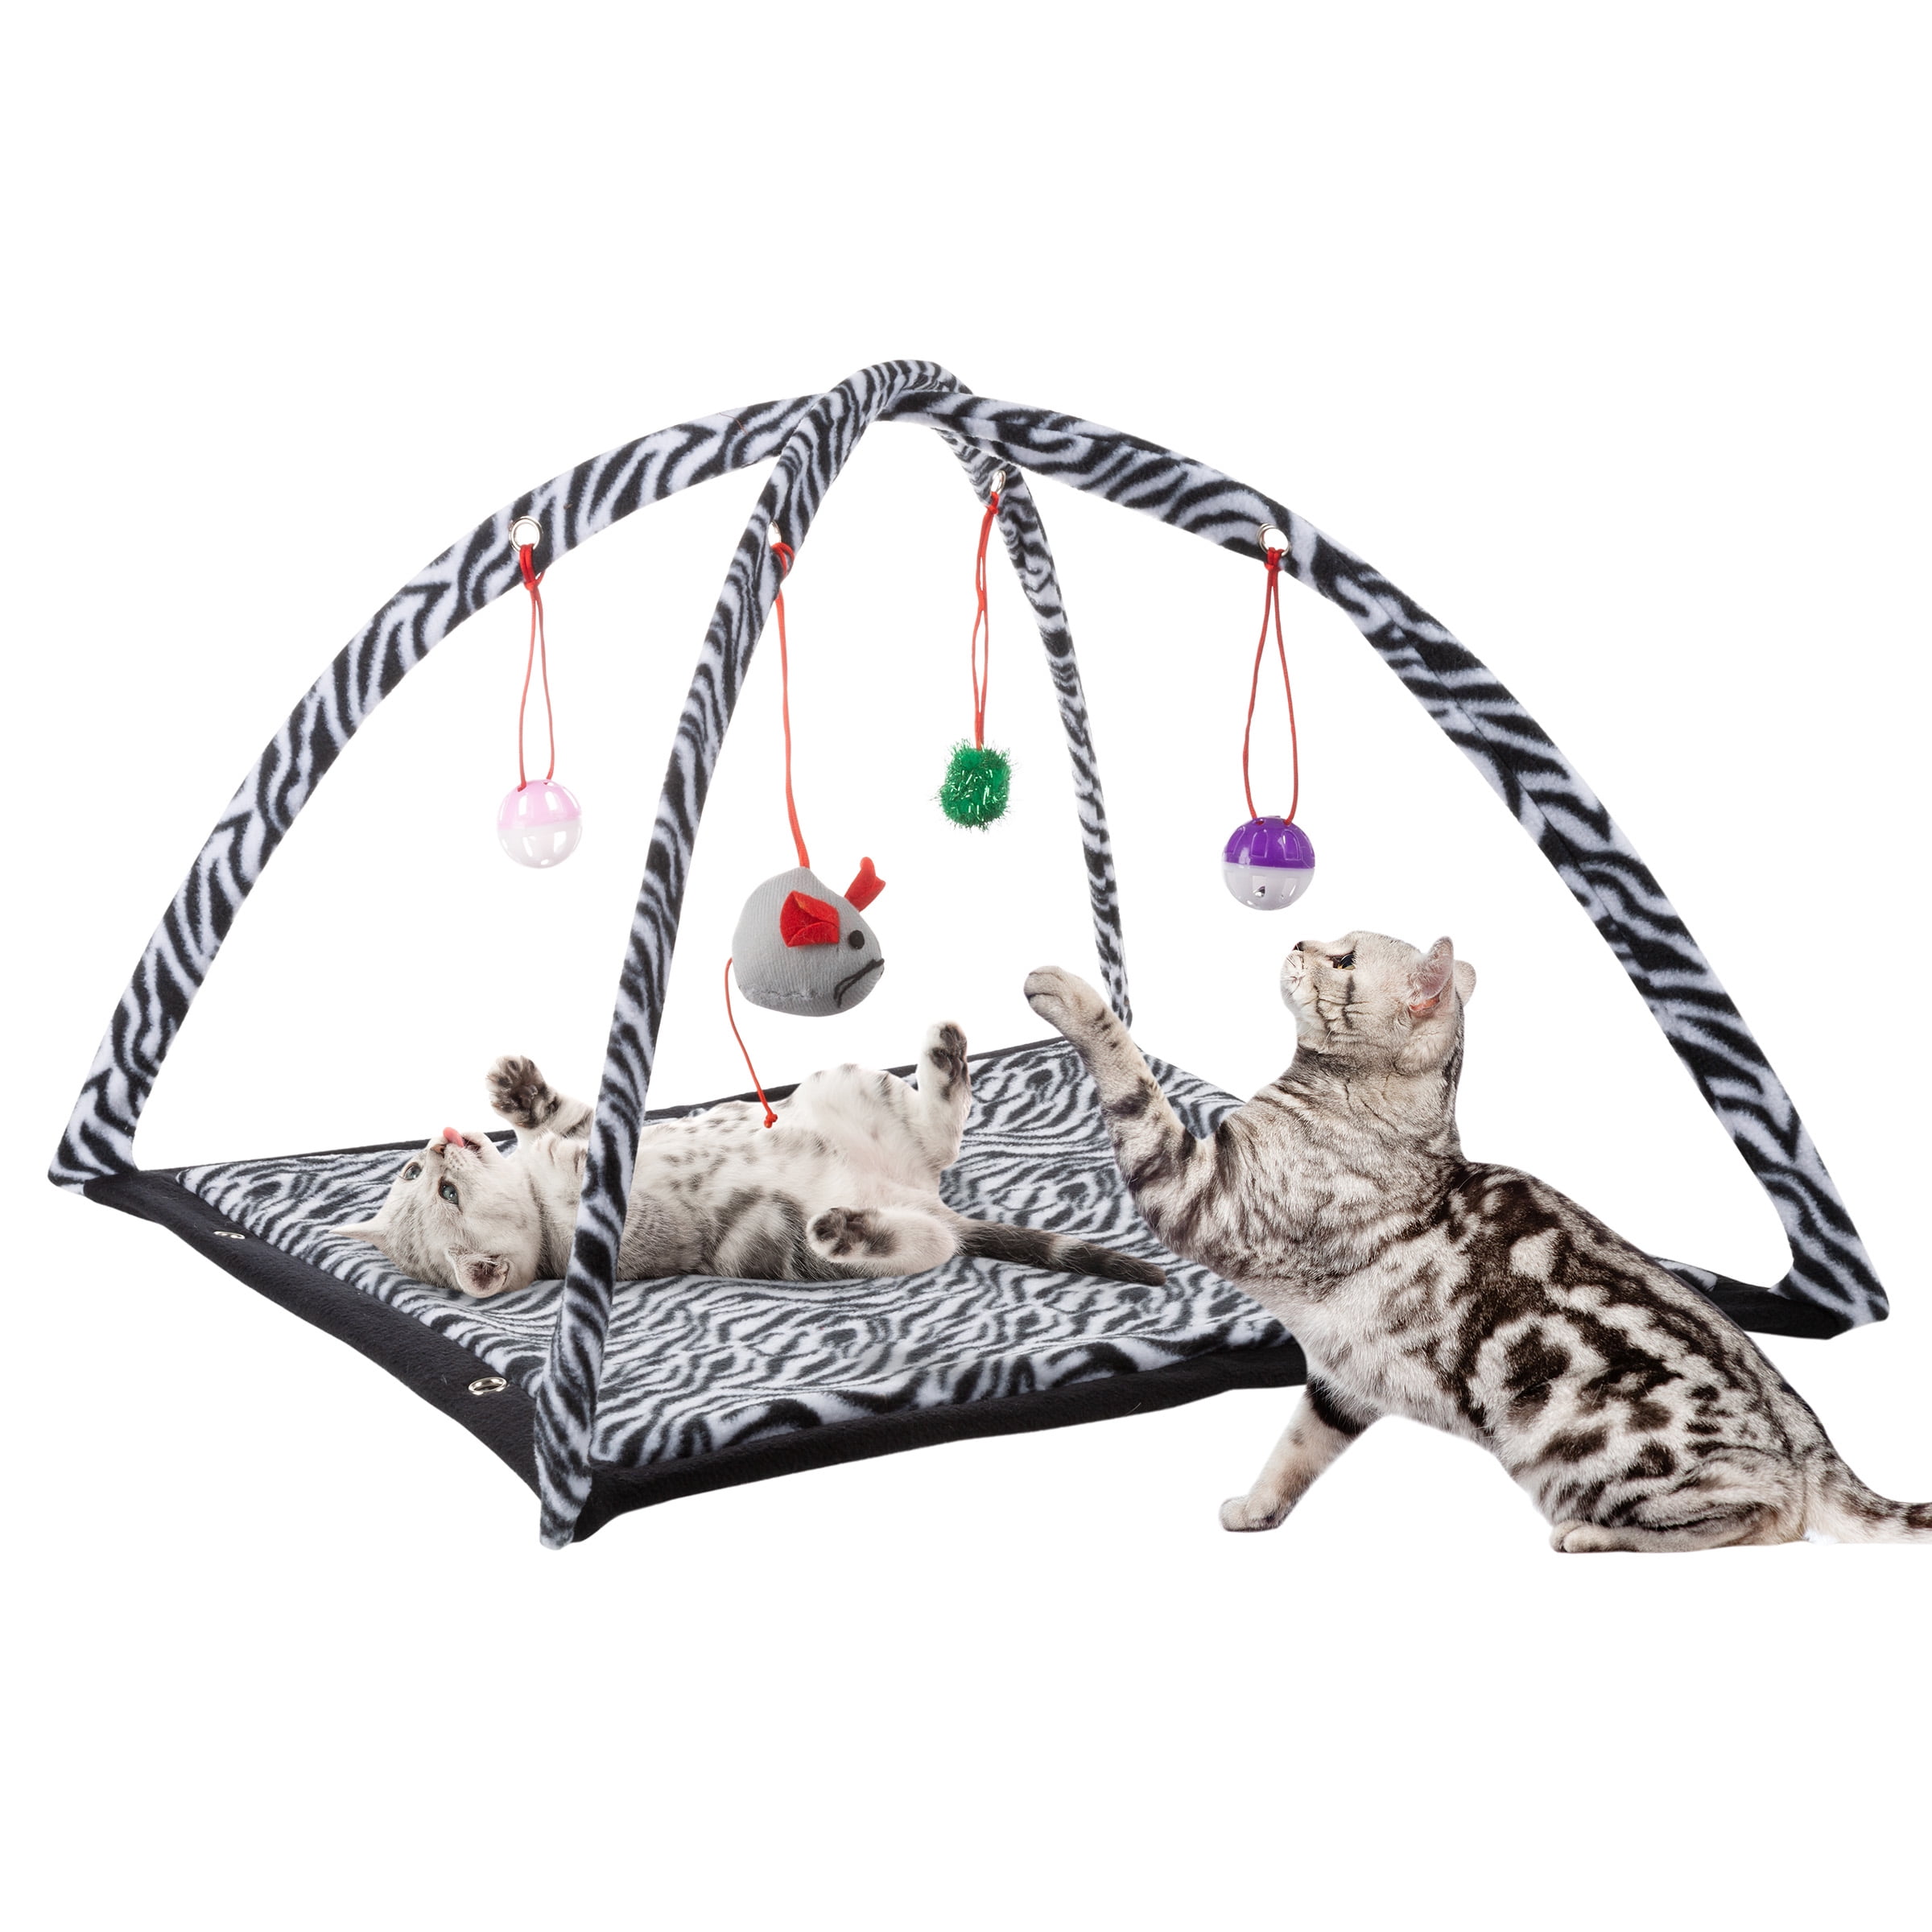 FREE SHIP TO USA COASTAL LIL PALS KITTEN RAINBOW MICE 4 PACK WITH BELL CAT TOY 